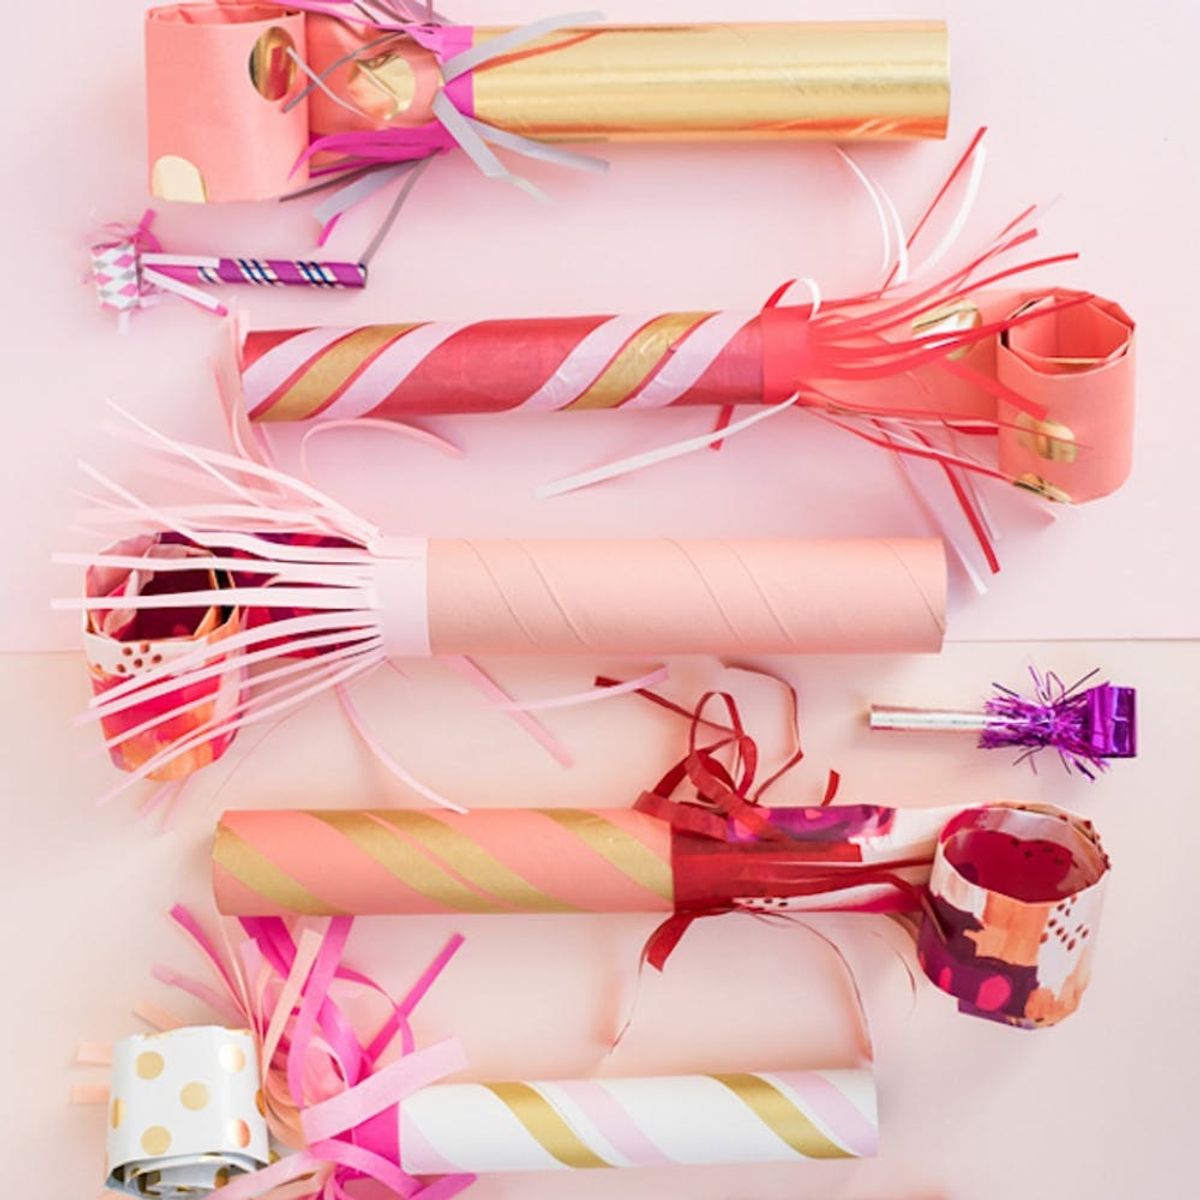 What to Make This Weekend: Giant Party Blowers, Mini Cornucopias + More